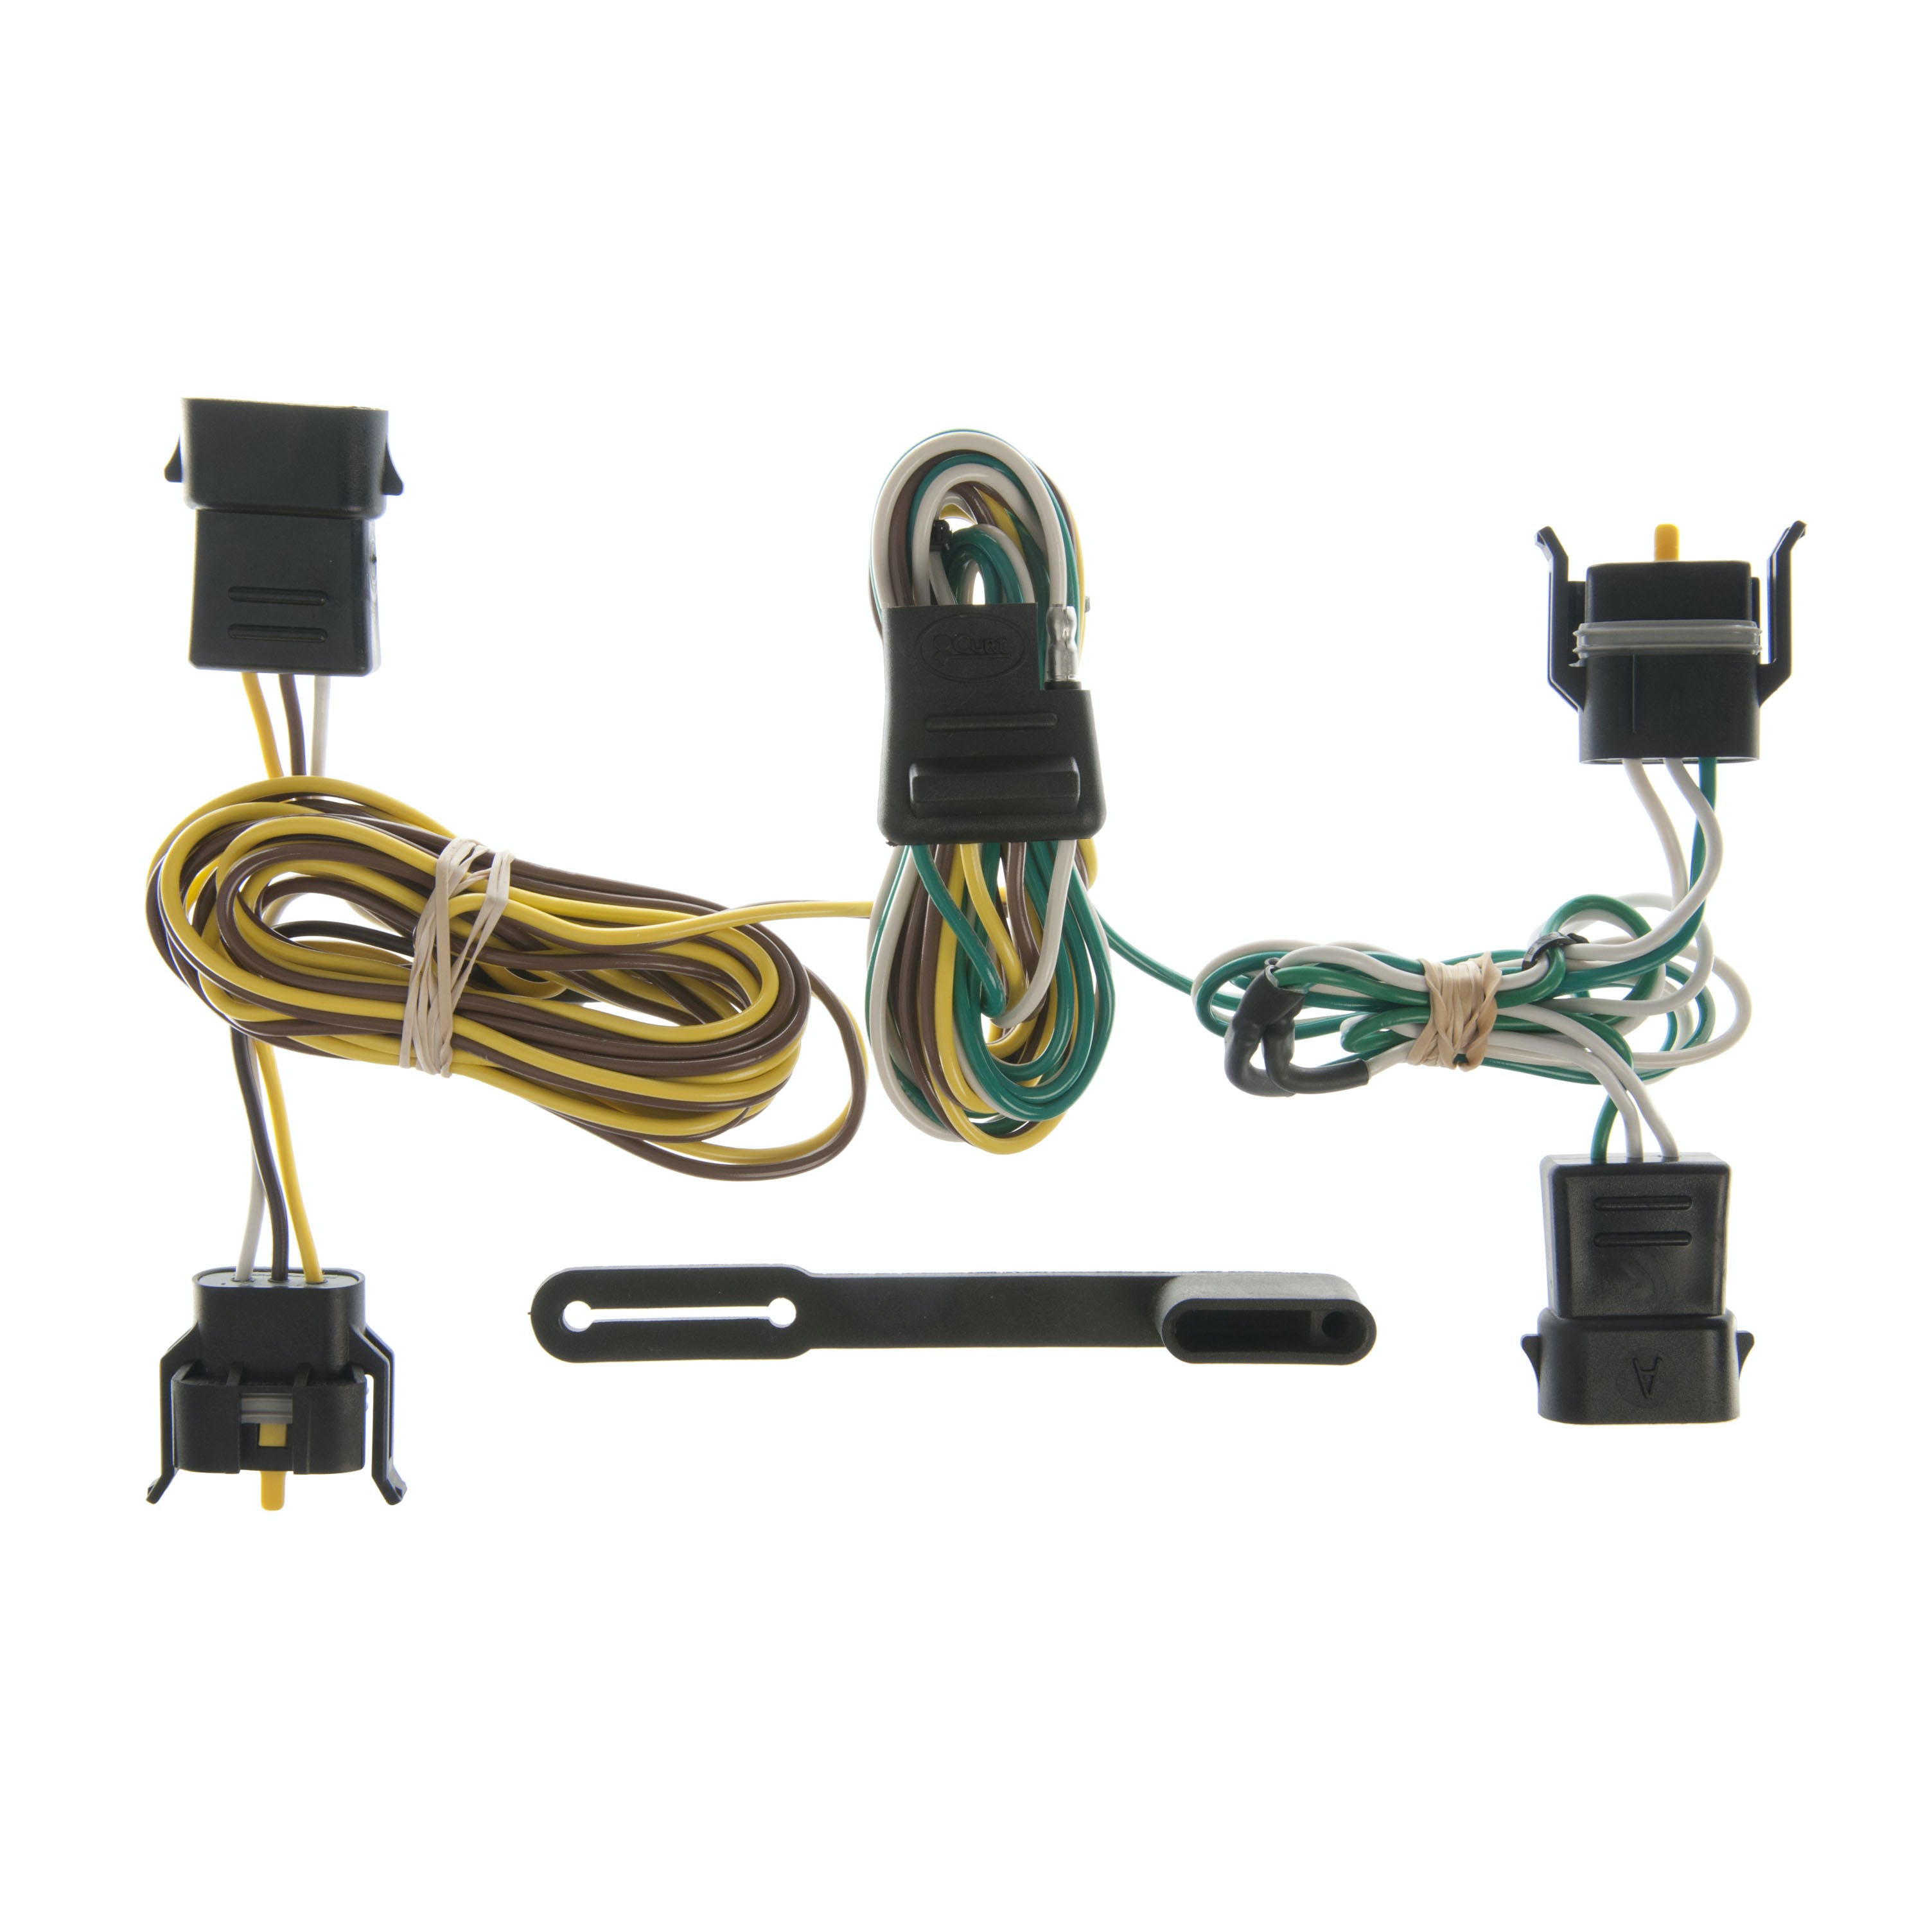 CURT 55344 Custom Wiring Harness, 4-Way Flat Output, Select Ford, Lincoln, Mercury Vehicles